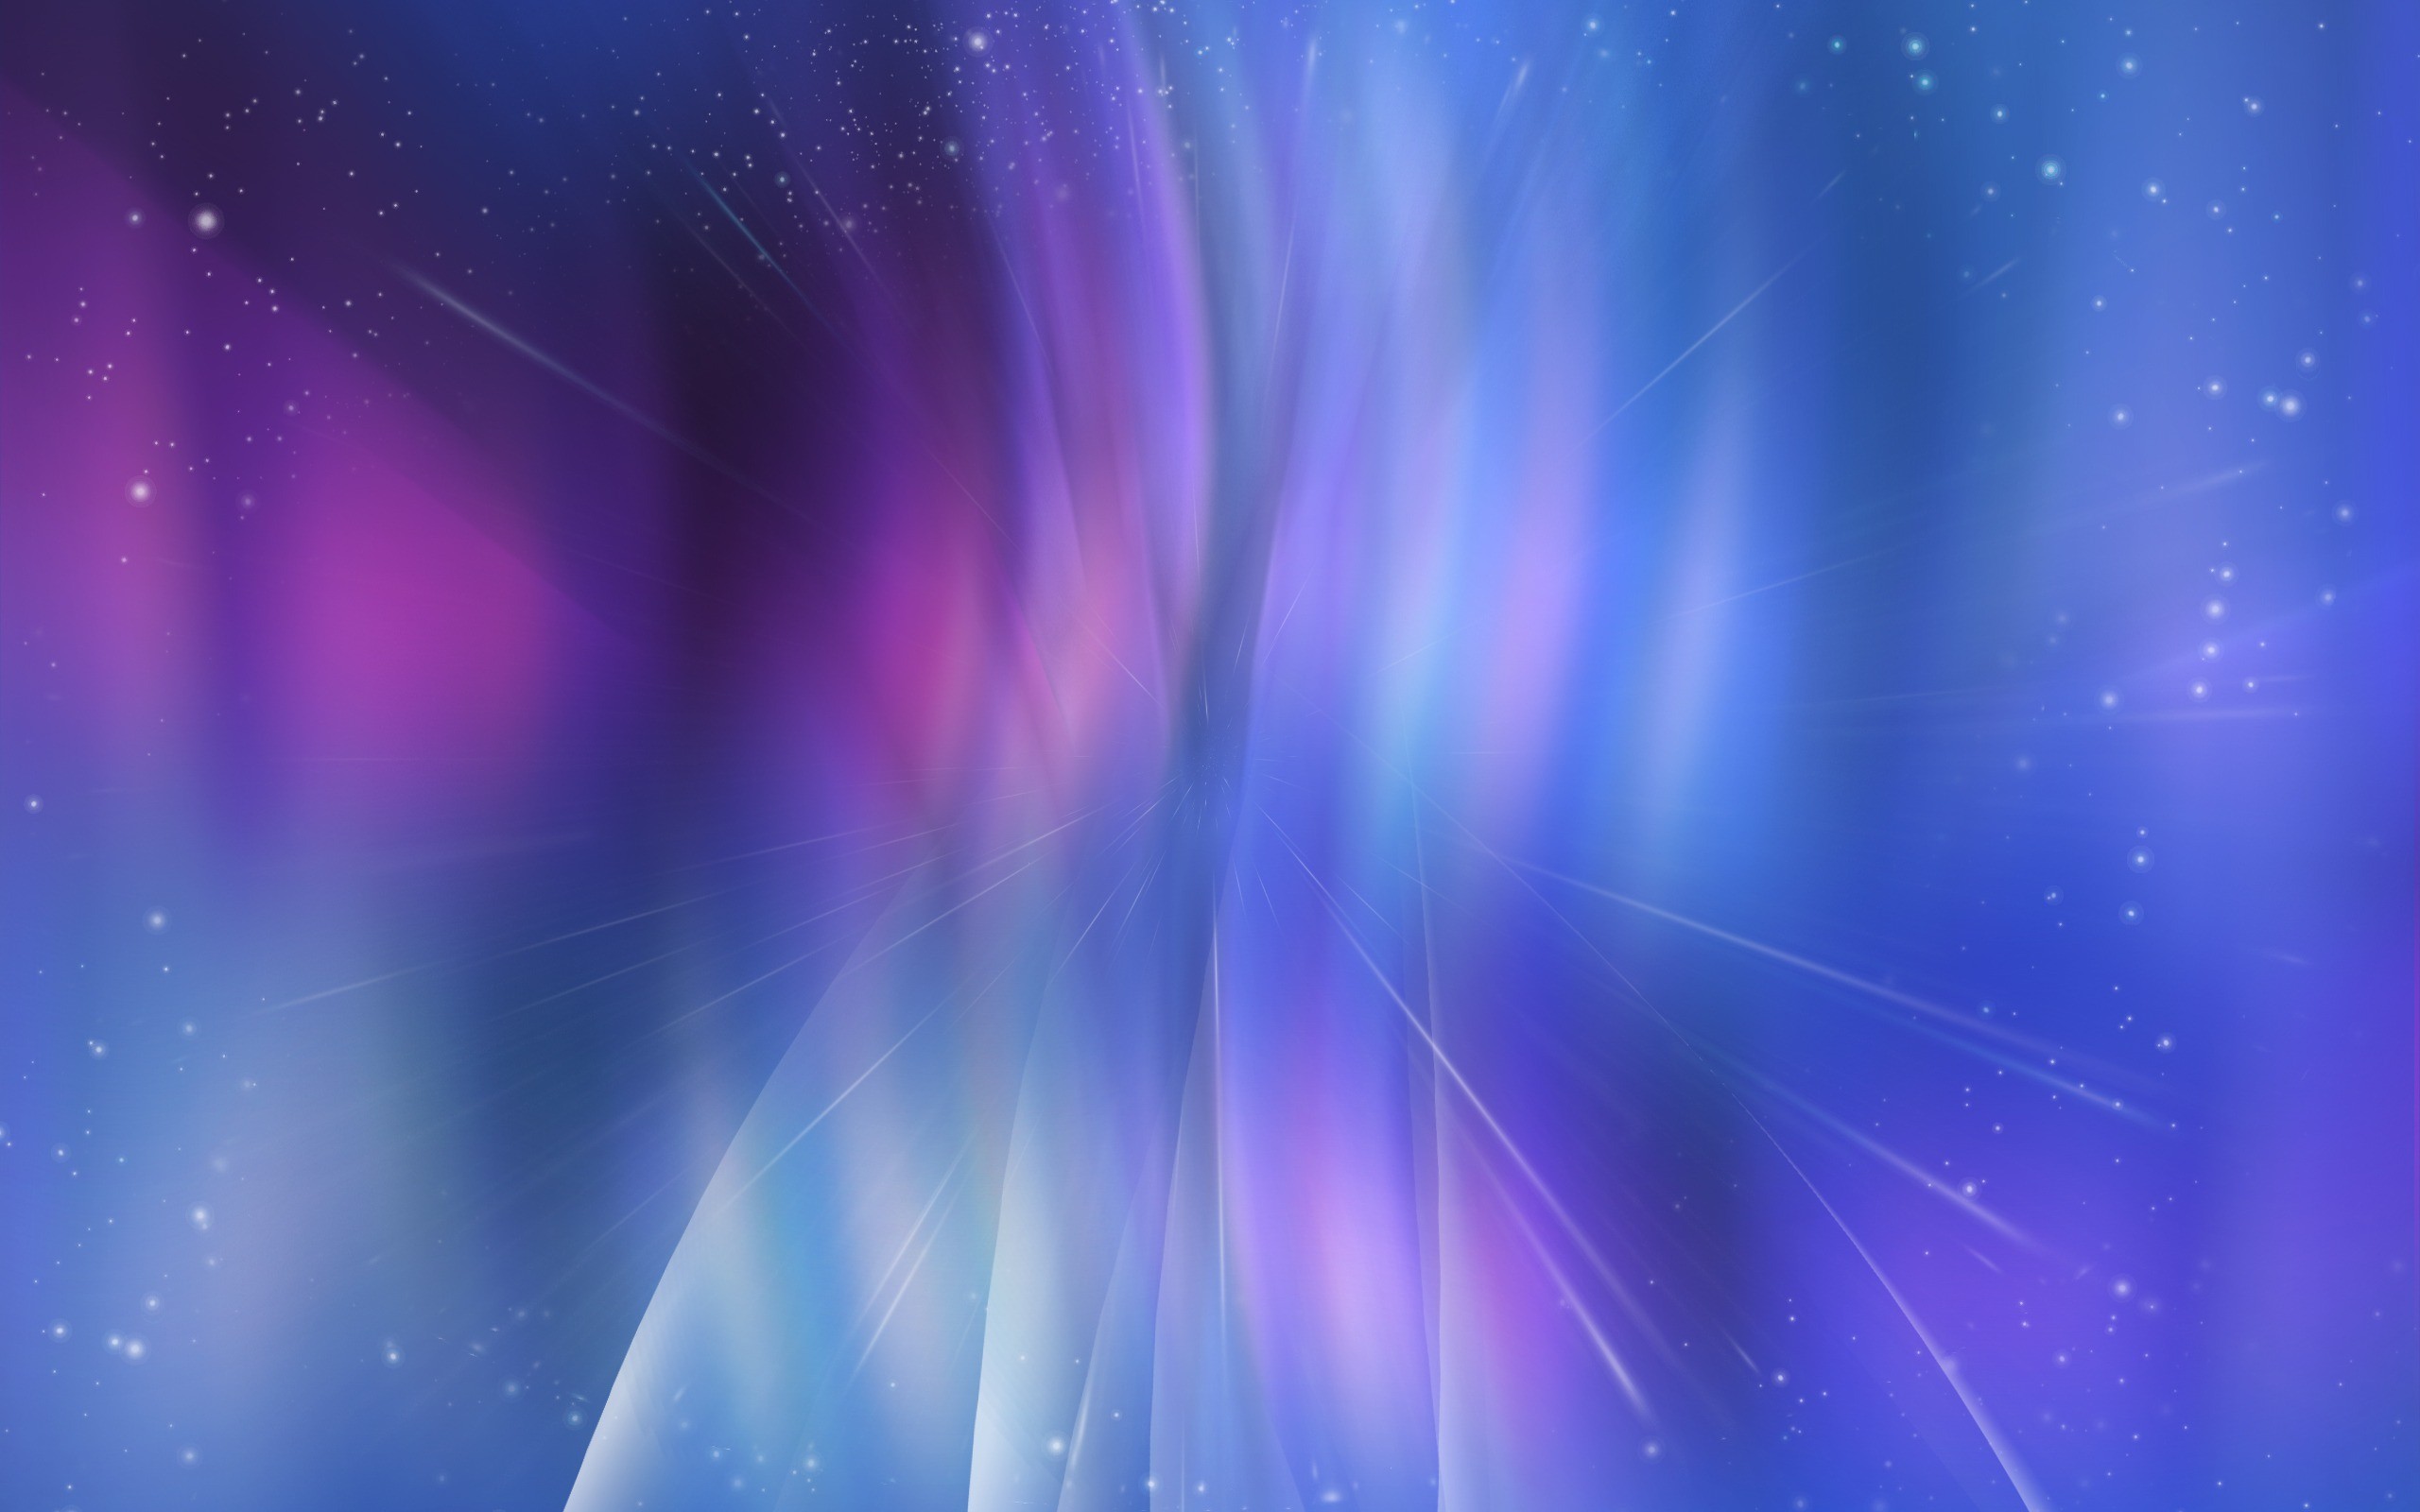 Abstract HD S 9996 Wallpapers – abstract